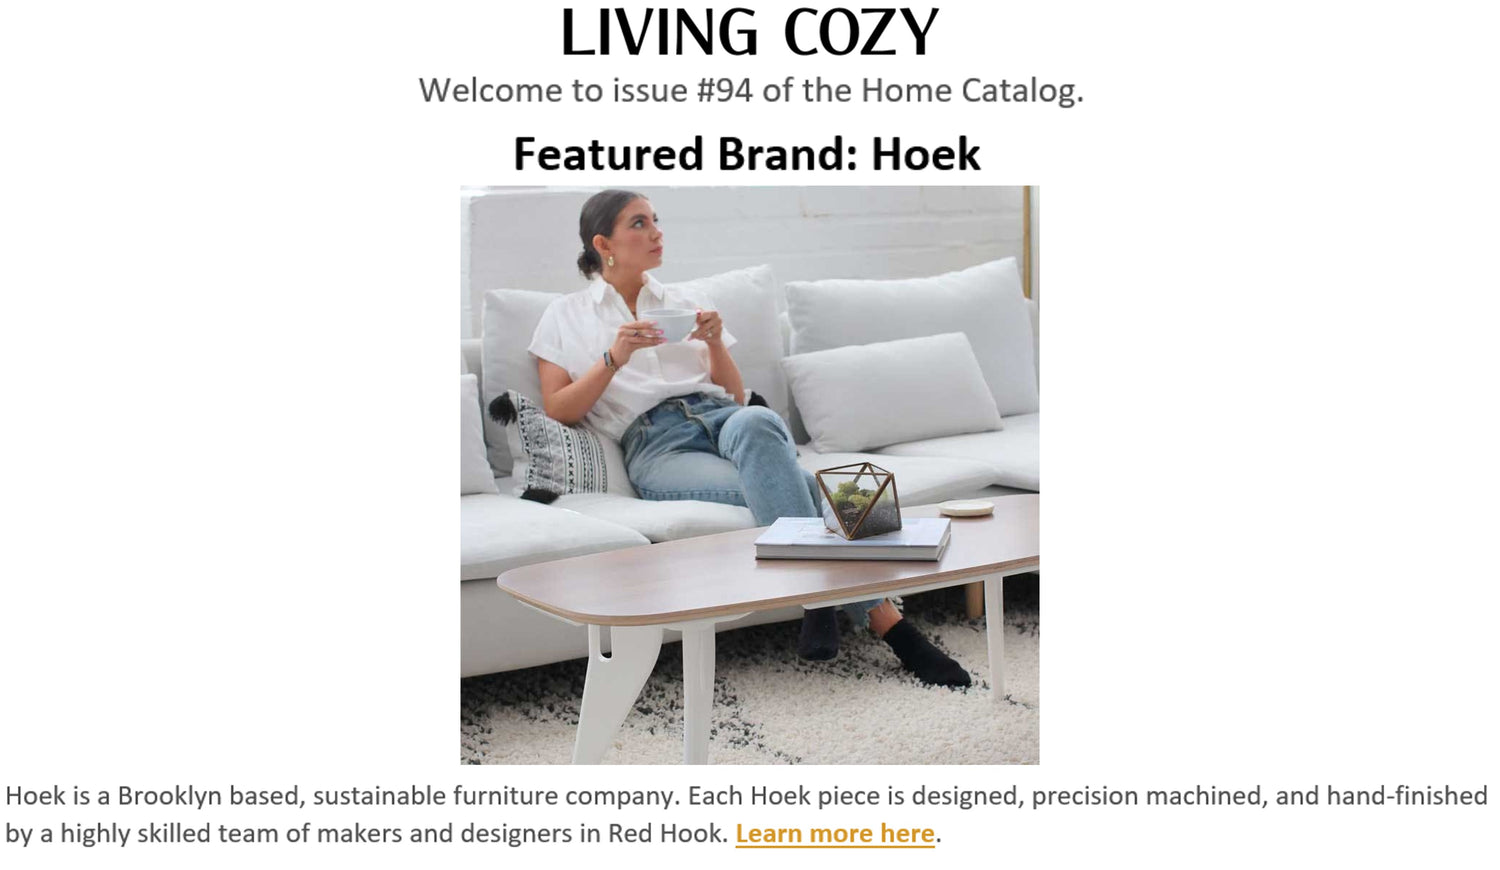 Hoek home has been featured by Living Cozy!